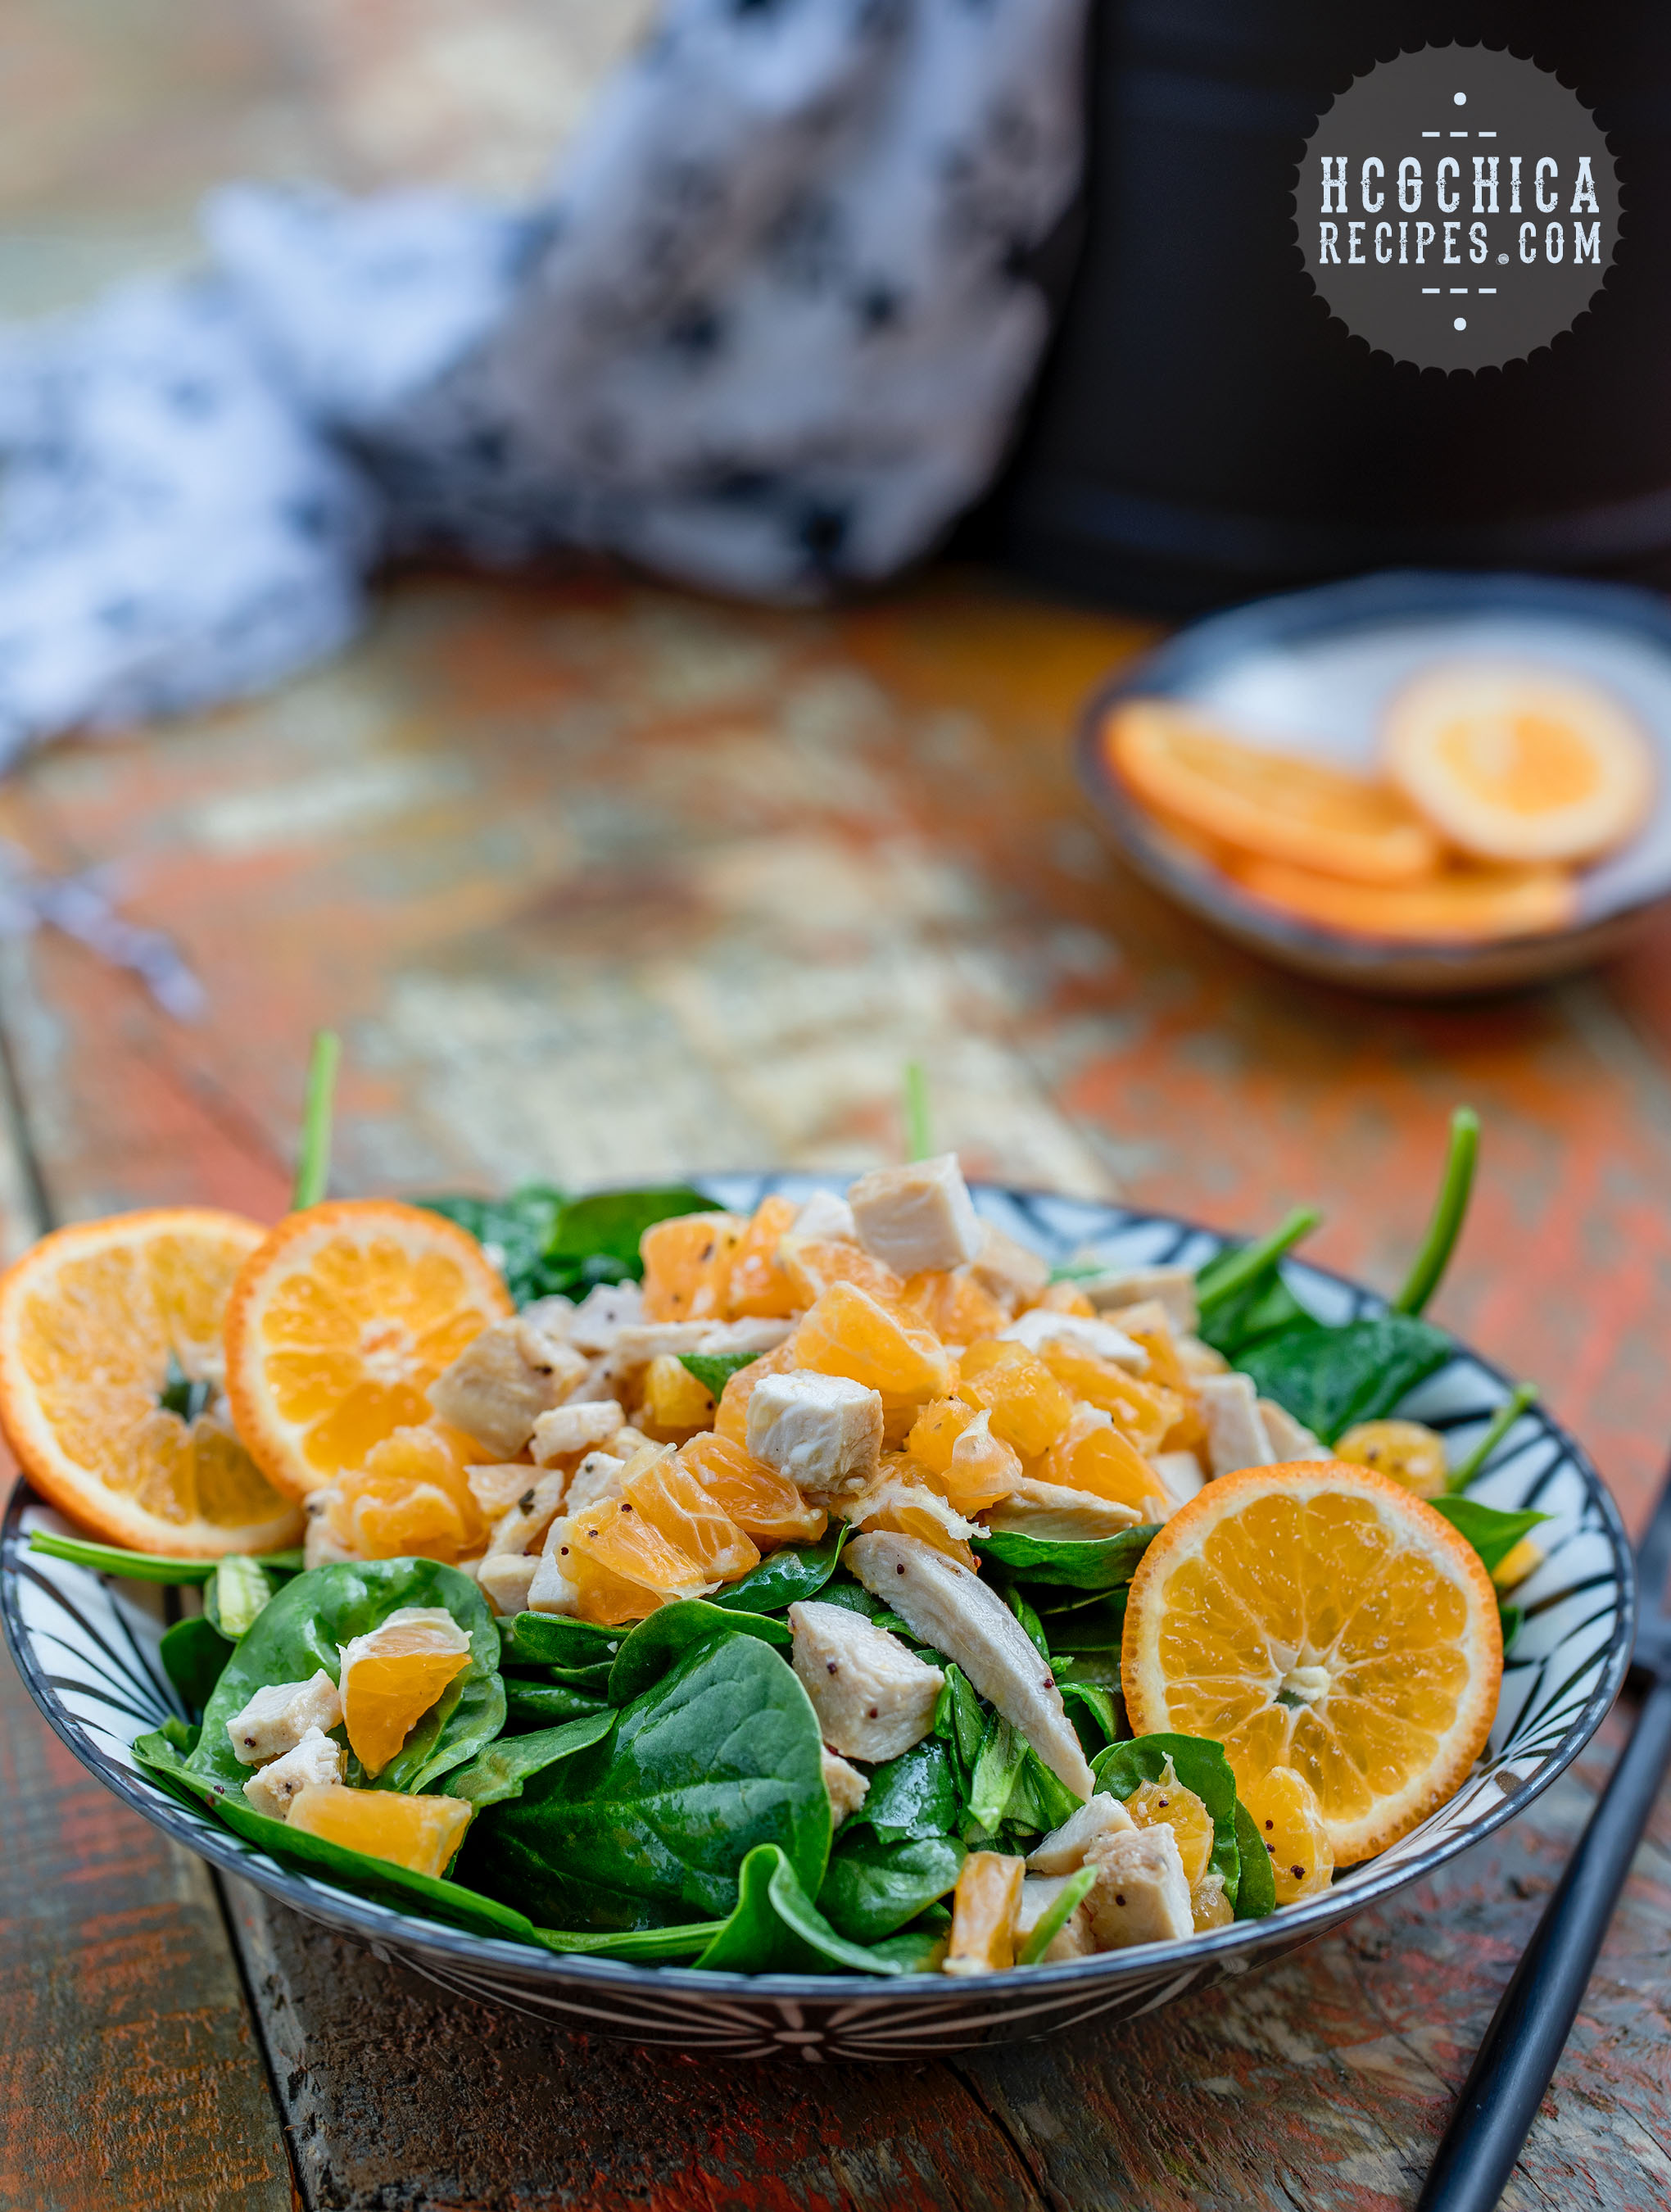 P2 hCG Diet Recipe: Poppy Seed Chicken & Spinach Salad with Clementines